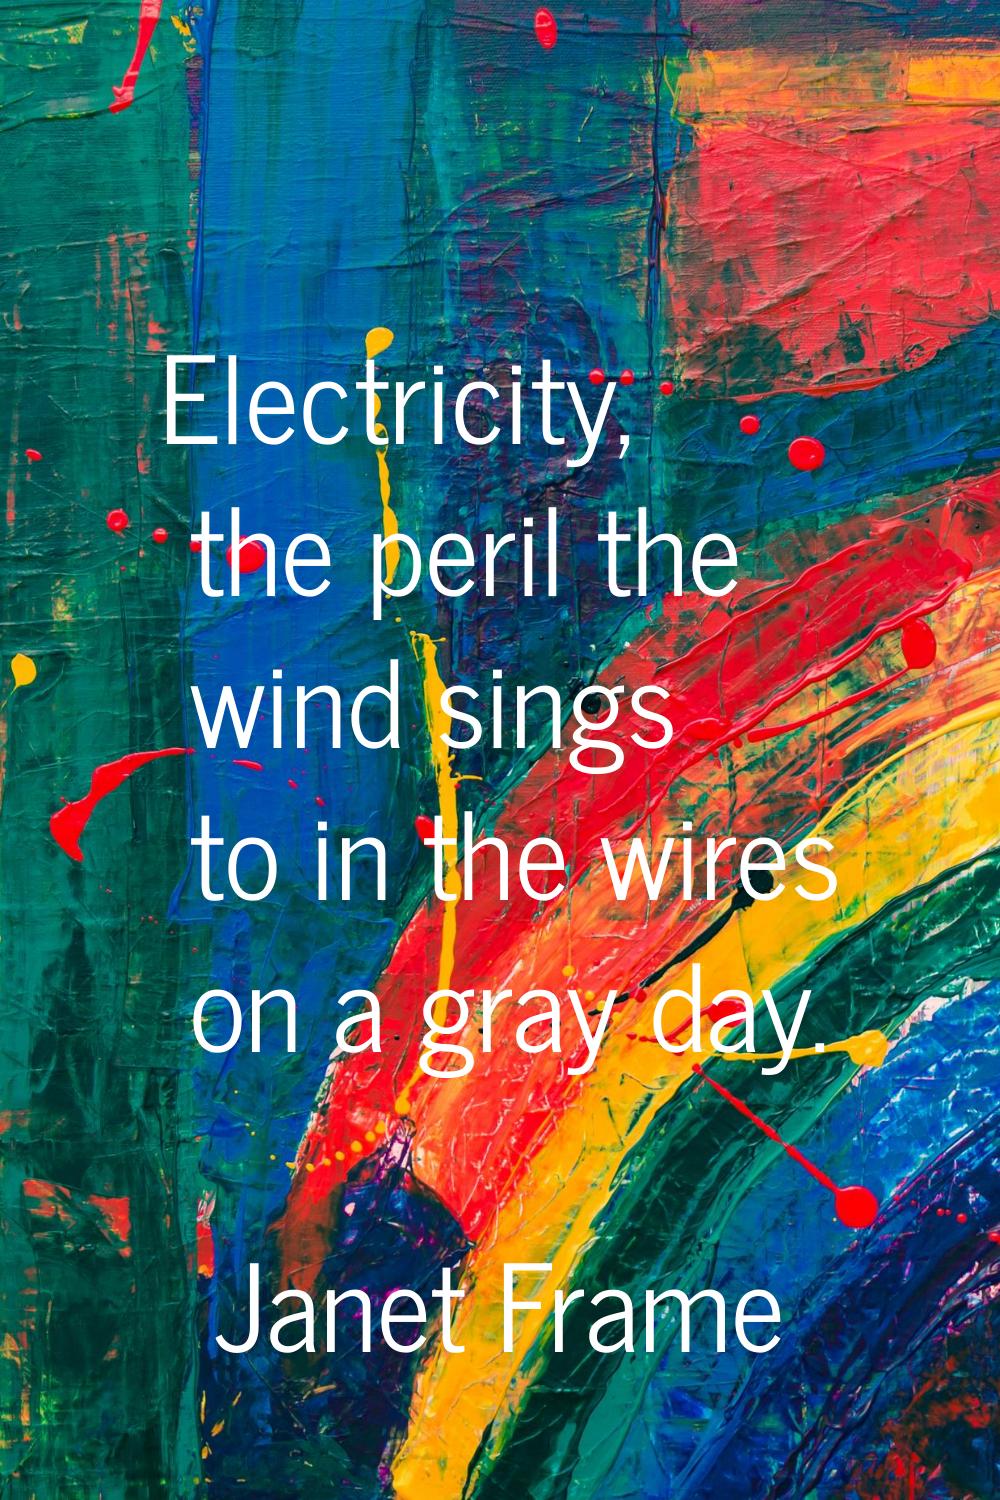 Electricity, the peril the wind sings to in the wires on a gray day.